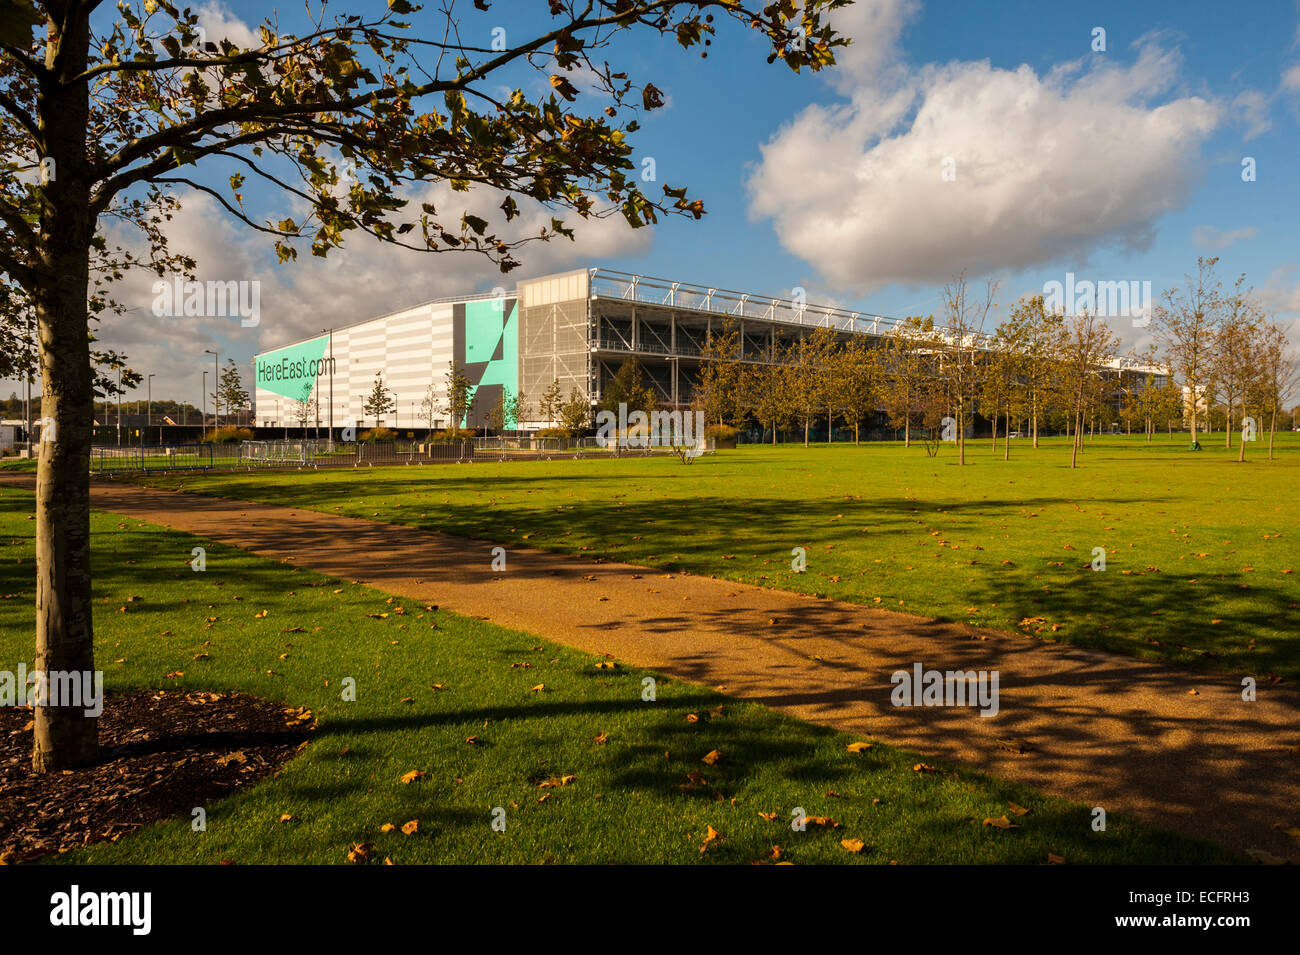 The Old Media centre building at Queen Elizabeth olympic park Stratford Stock Photo